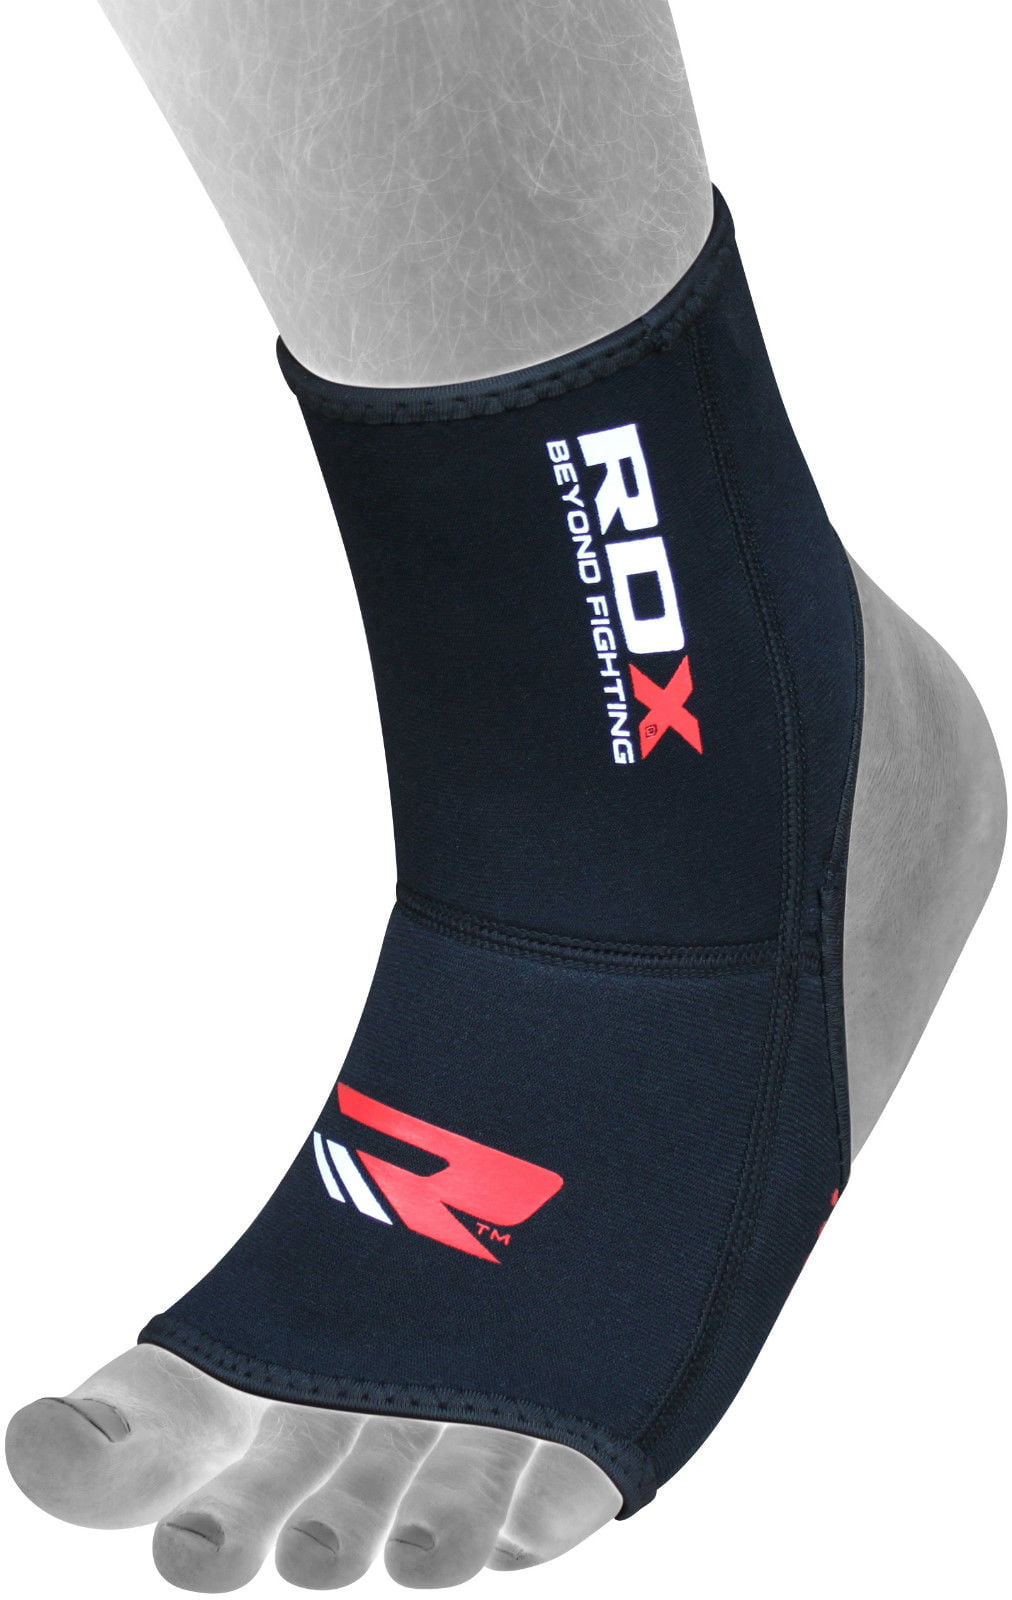 RDX Ankle Support Neoprene Brace Foot Guard Pad Protector Achilles